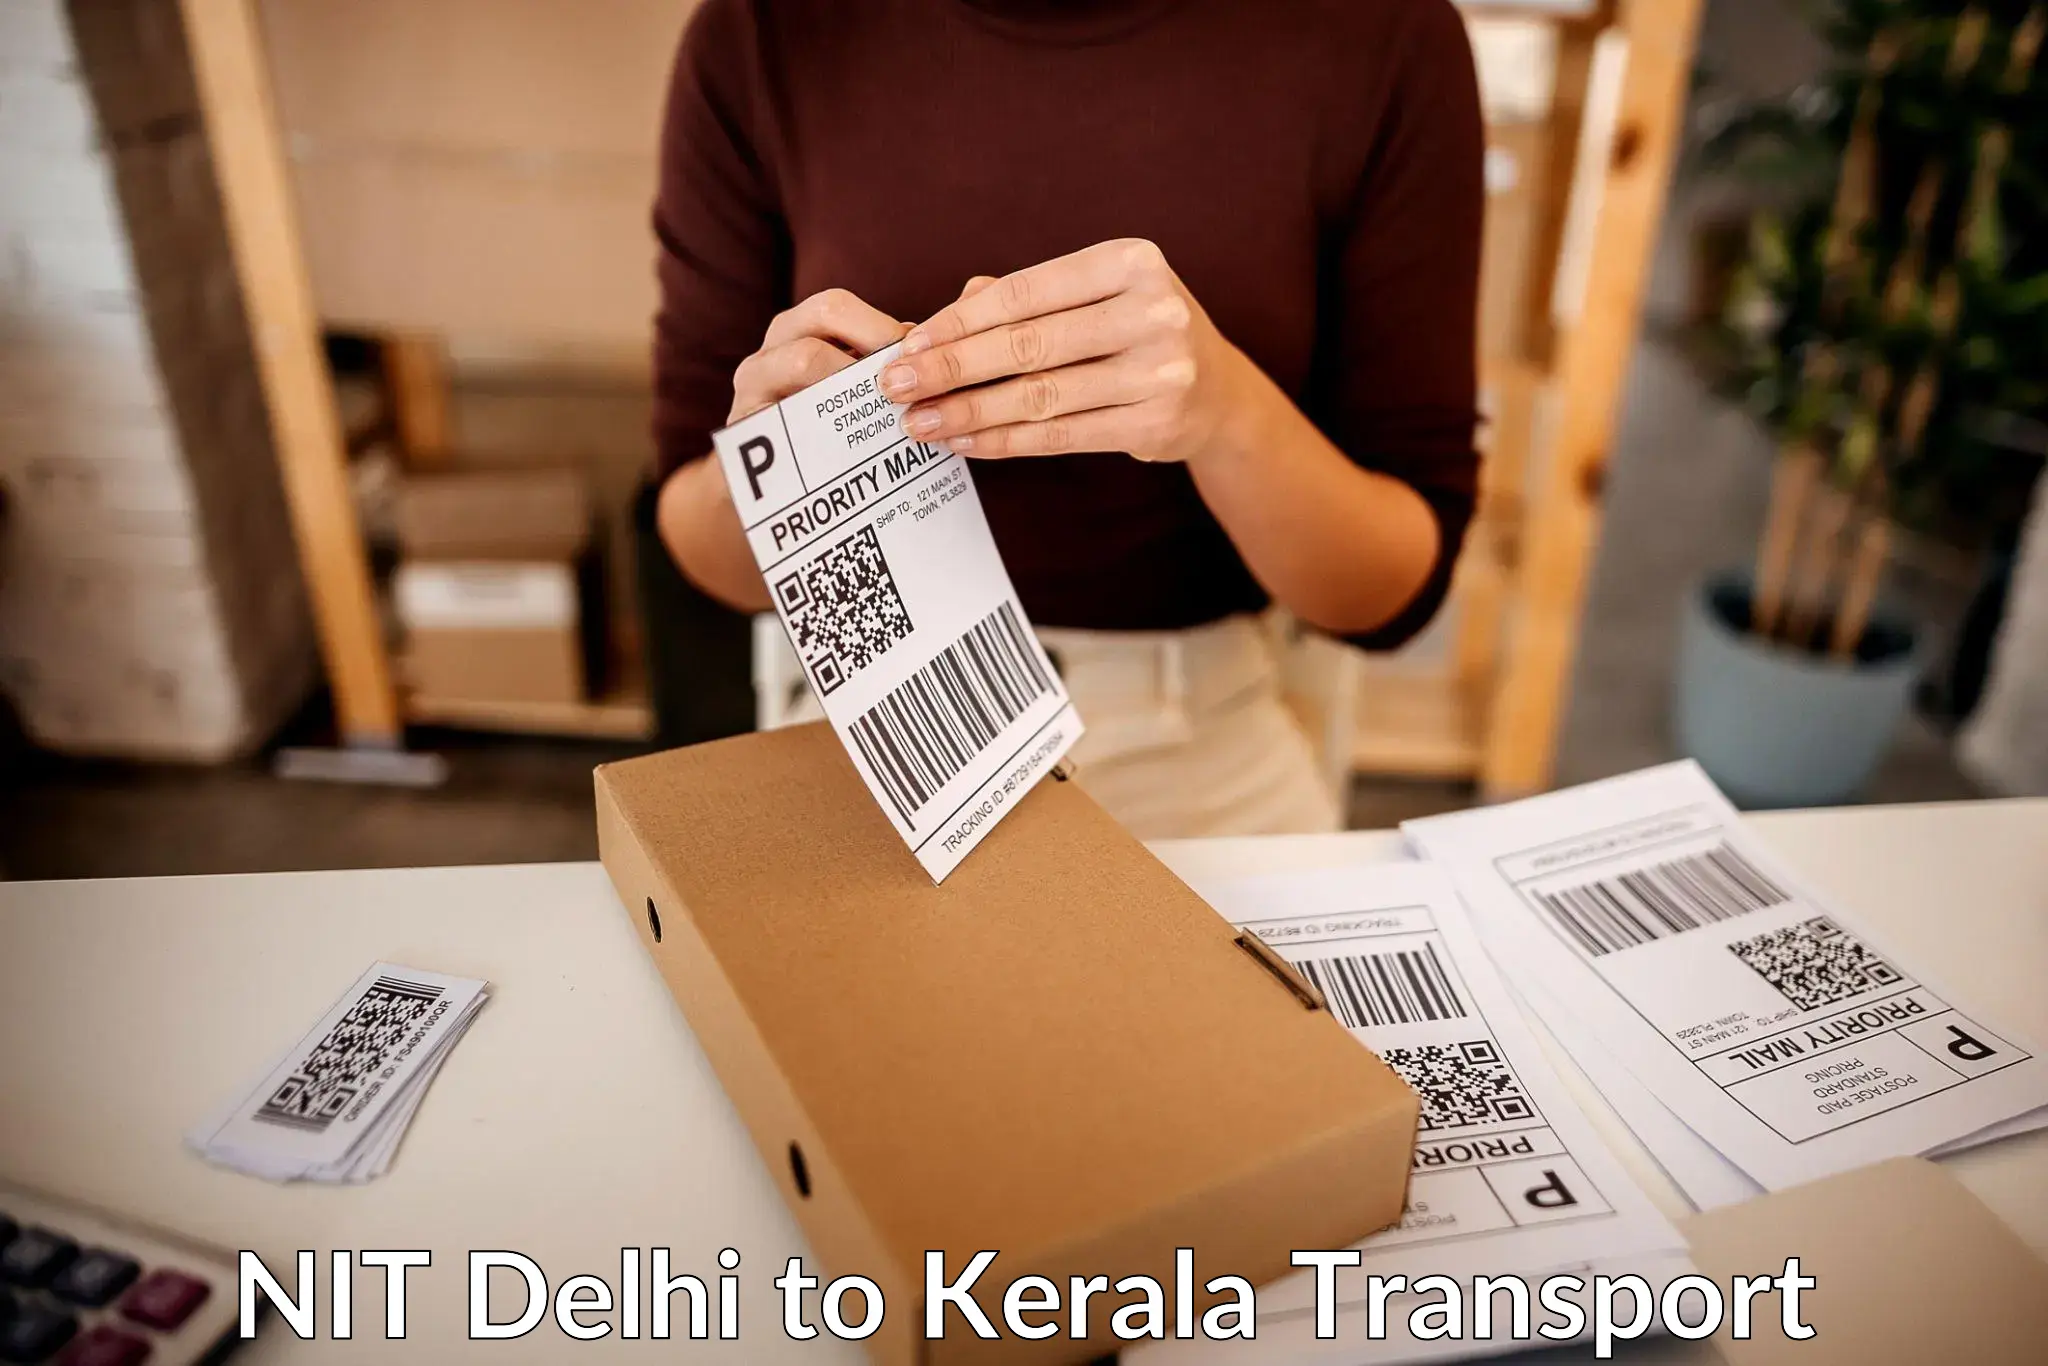 Air freight transport services NIT Delhi to Kerala